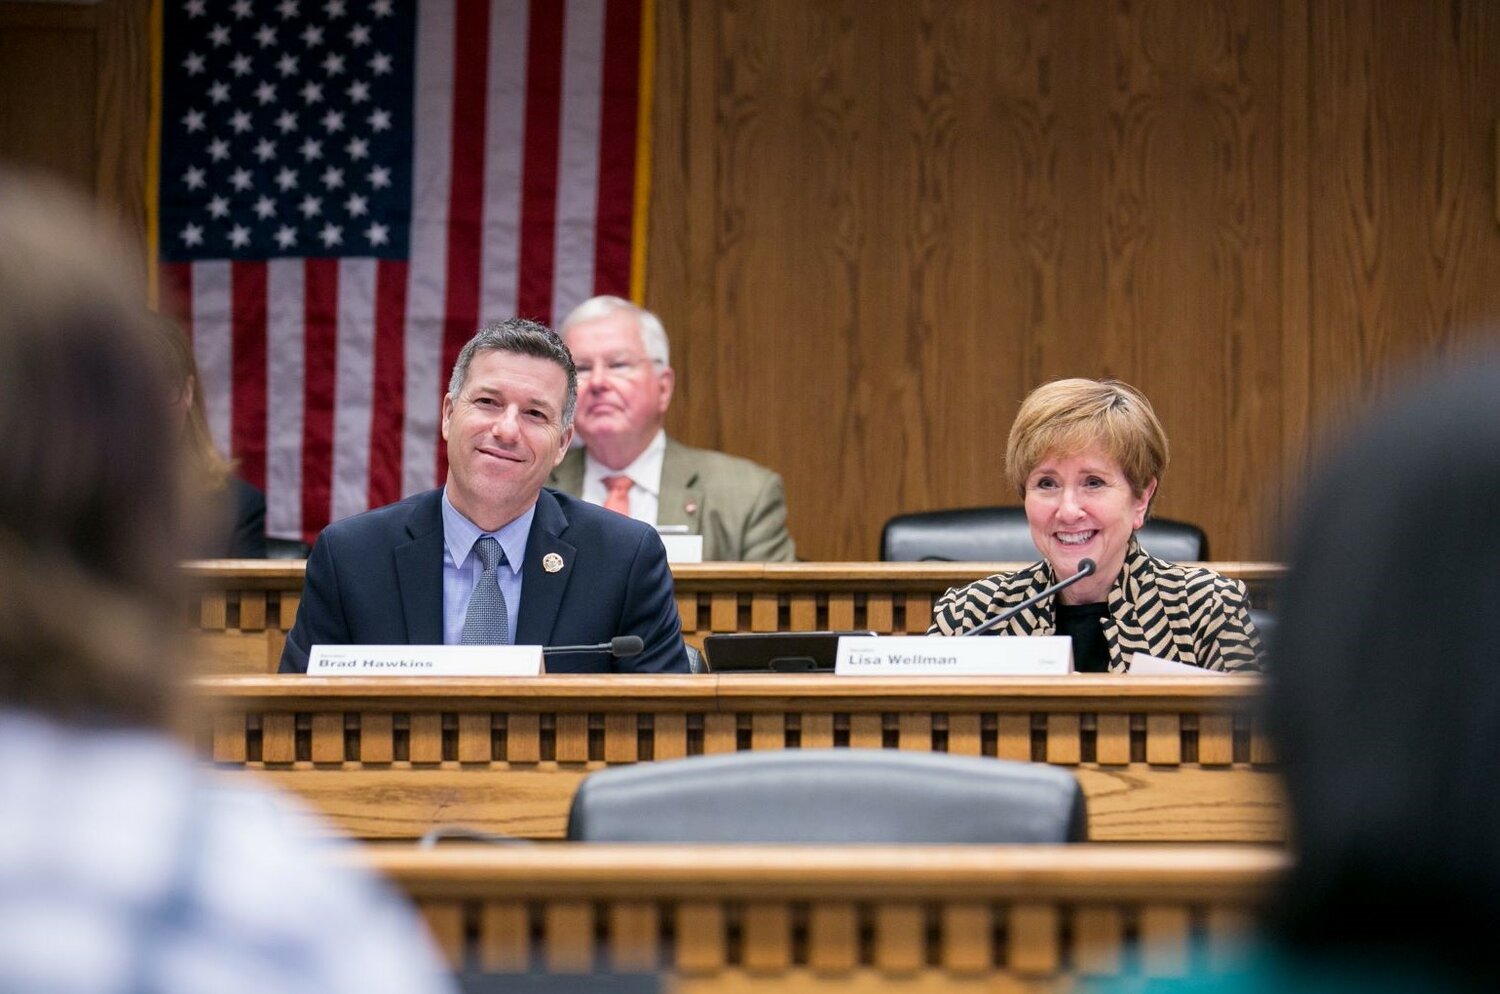 As the Republican ranking member on the Senate Early Learning and K-12 Education Committee, I work closely with the chair, Senator Lisa Wellman of Mercer Island, during committee hearings.
Submitted Photo